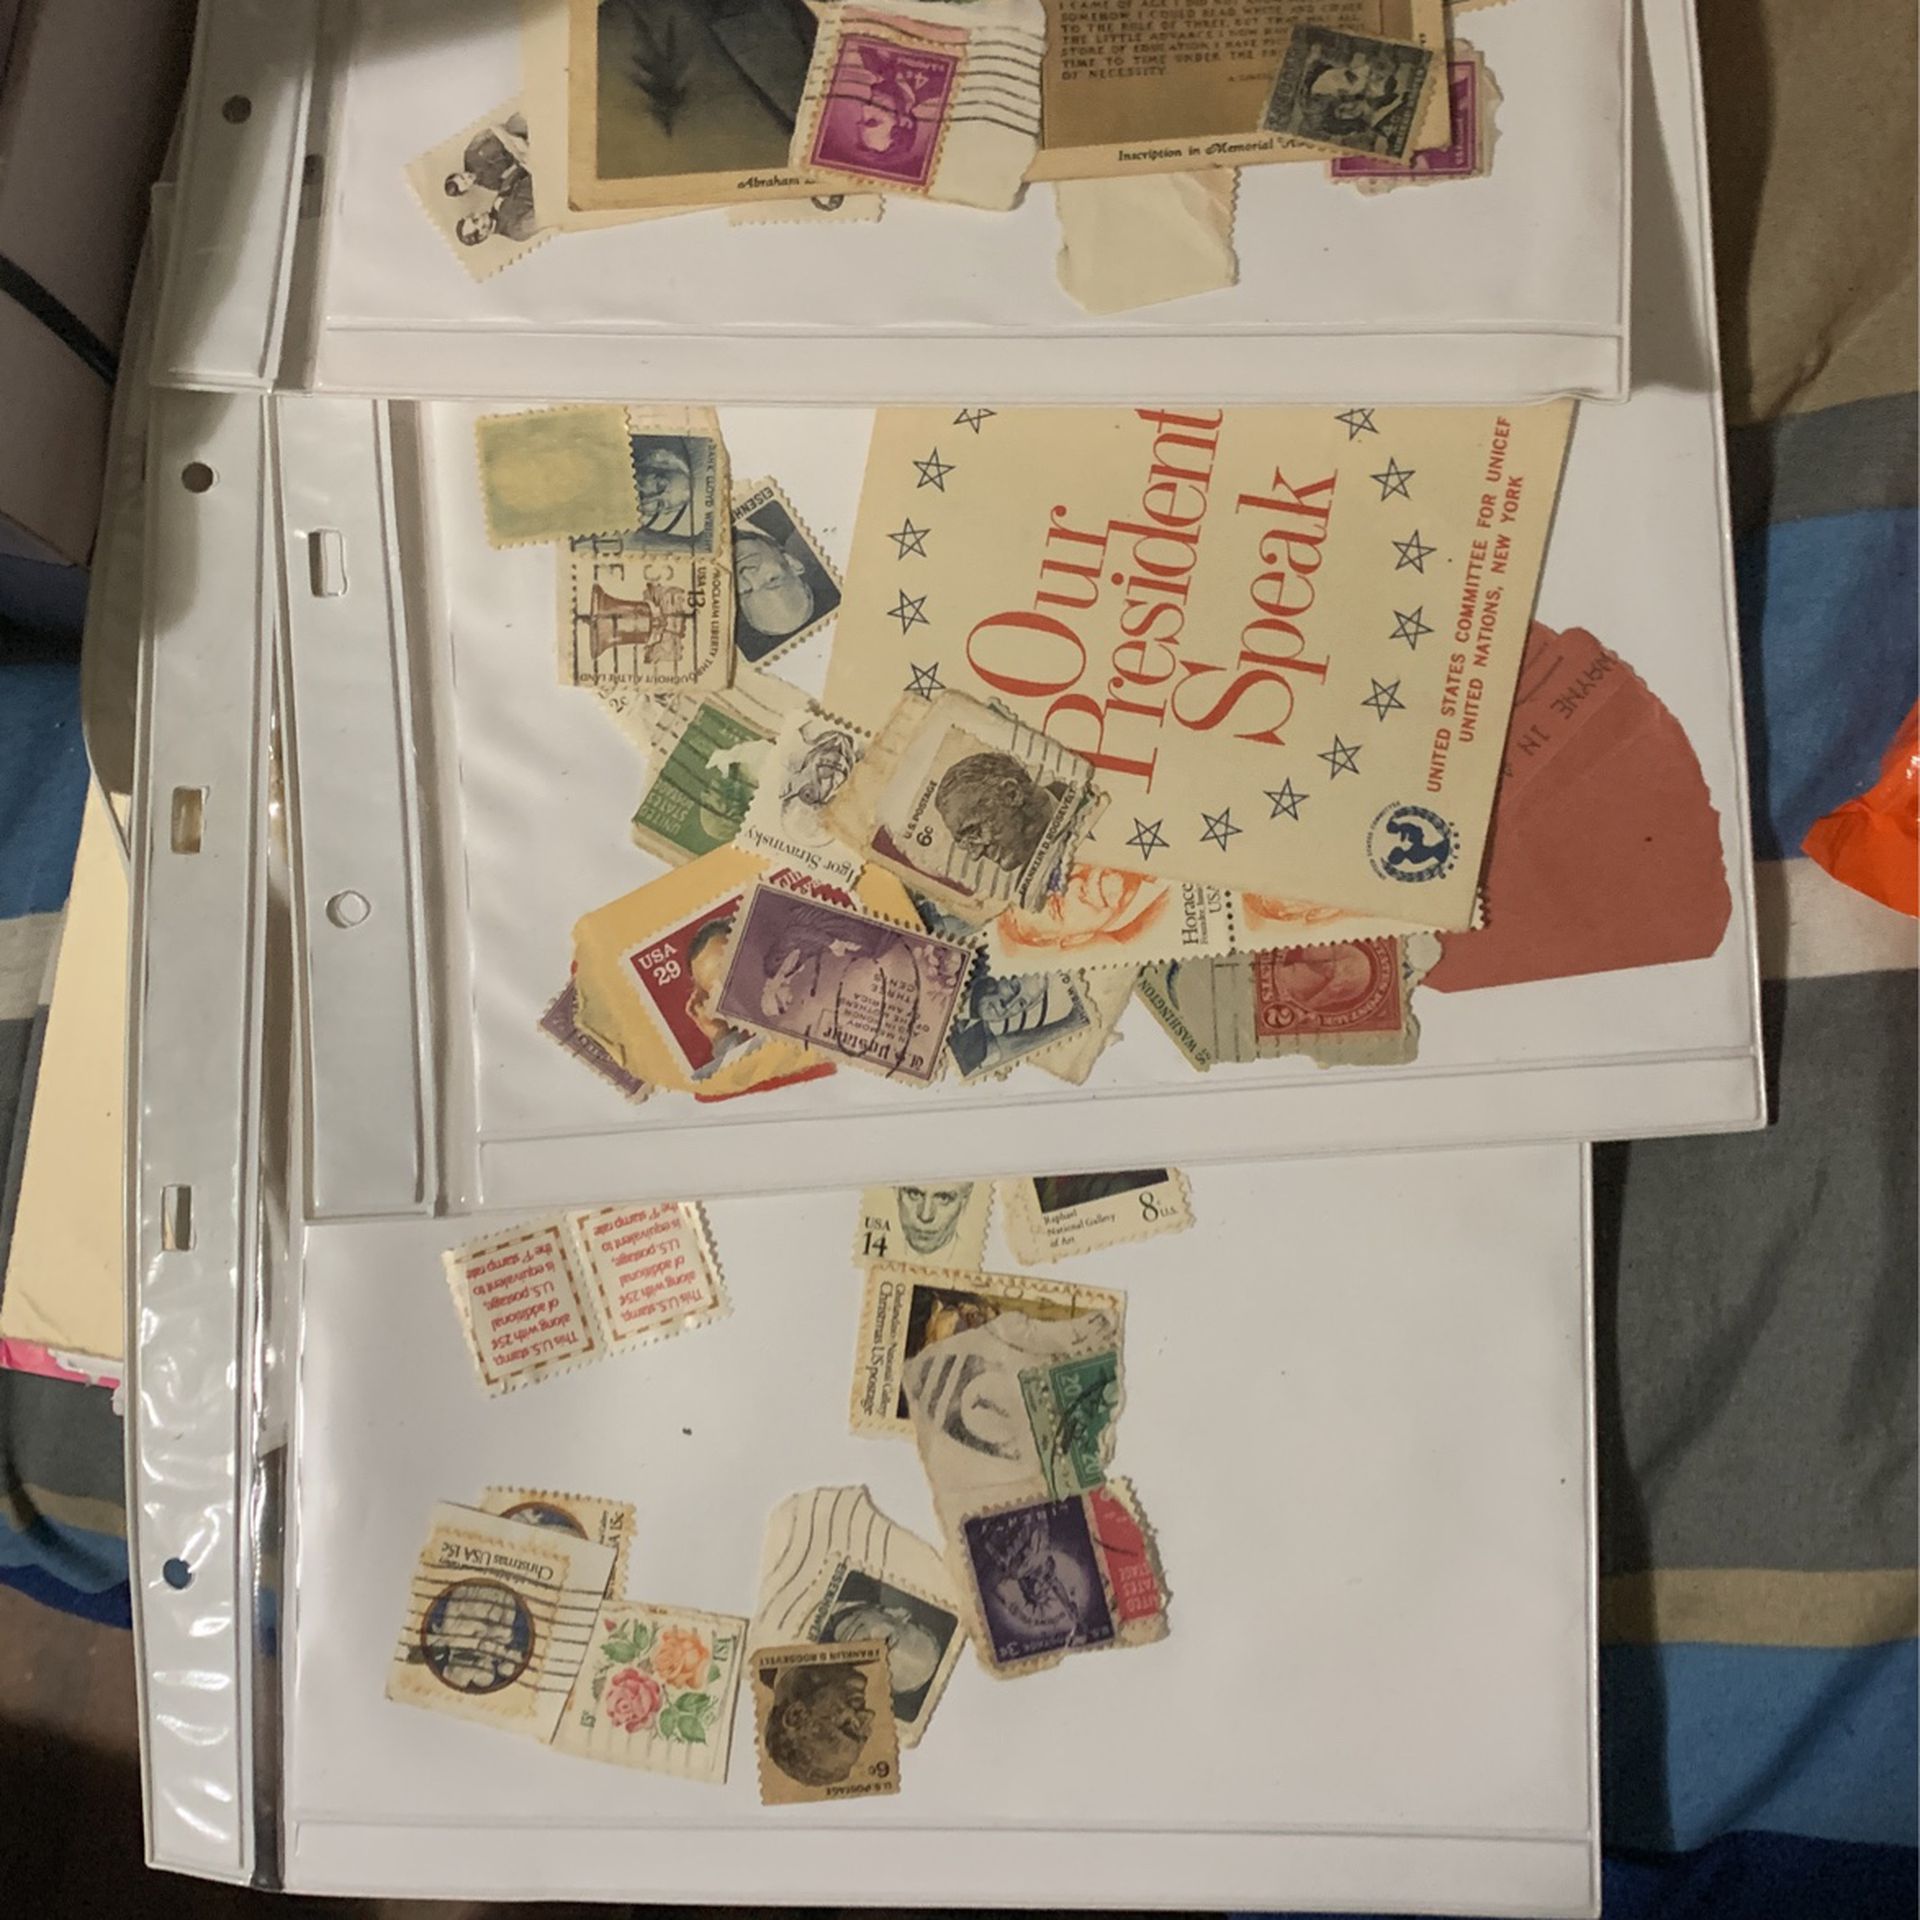 RARE Find In Grandmothers Basement. 1000’s Of Never Used And Used Stamps From A Hint Collection. WW2  Letters,  Post Cards, Maps, Newspapers, And More